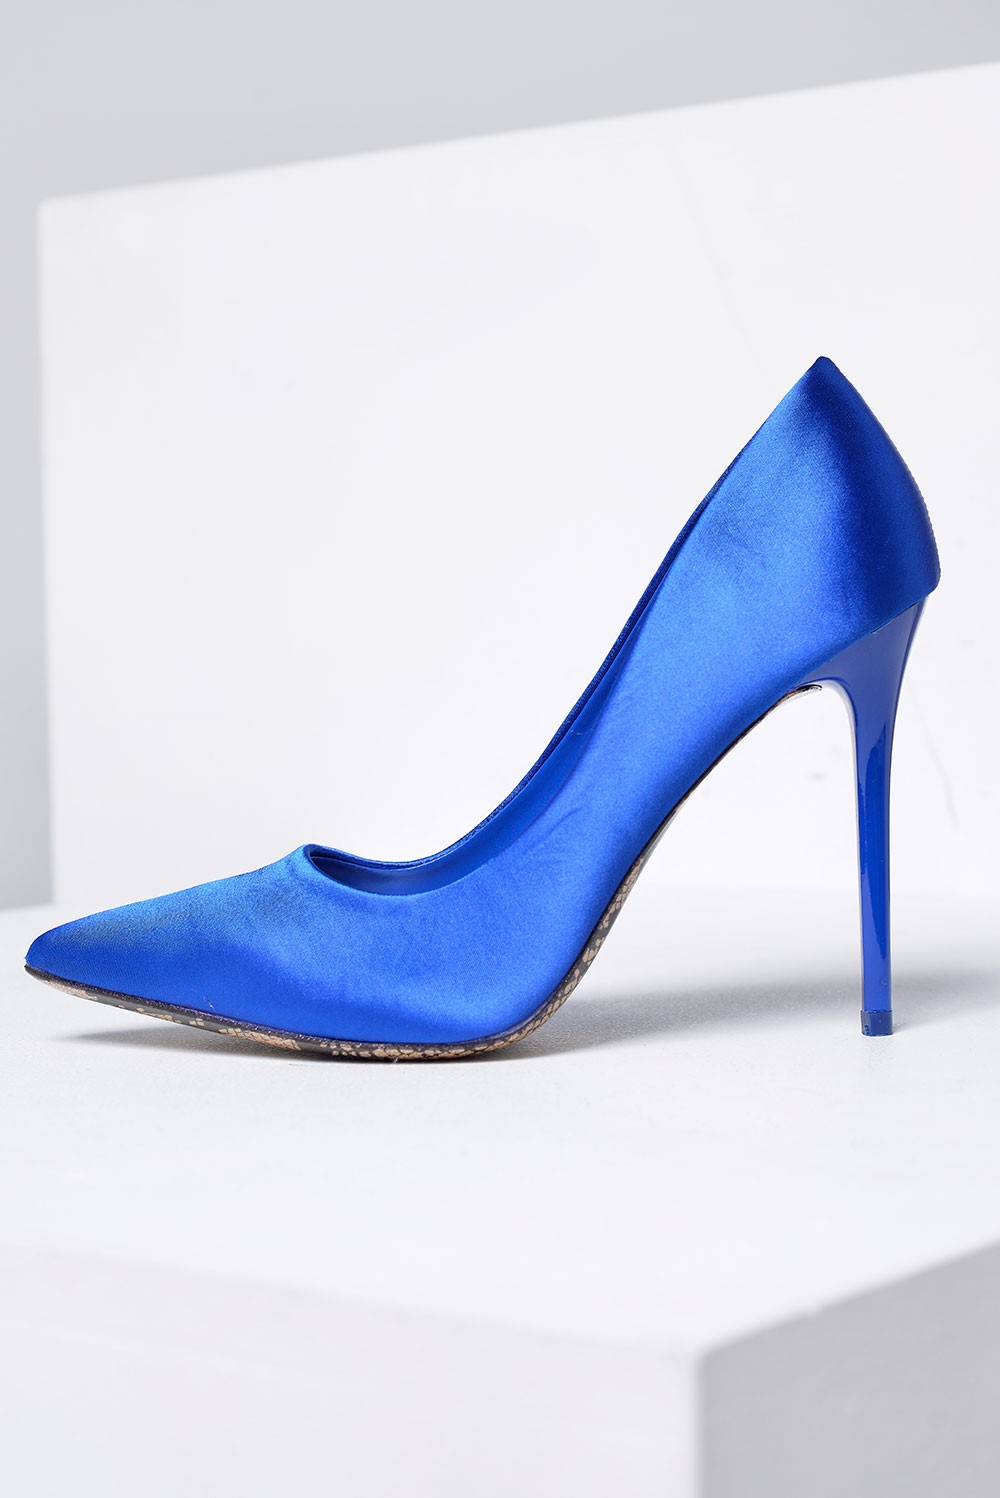 No Doubt Reilly Satin Court Shoes in Cobalt Blue | iCLOTHING